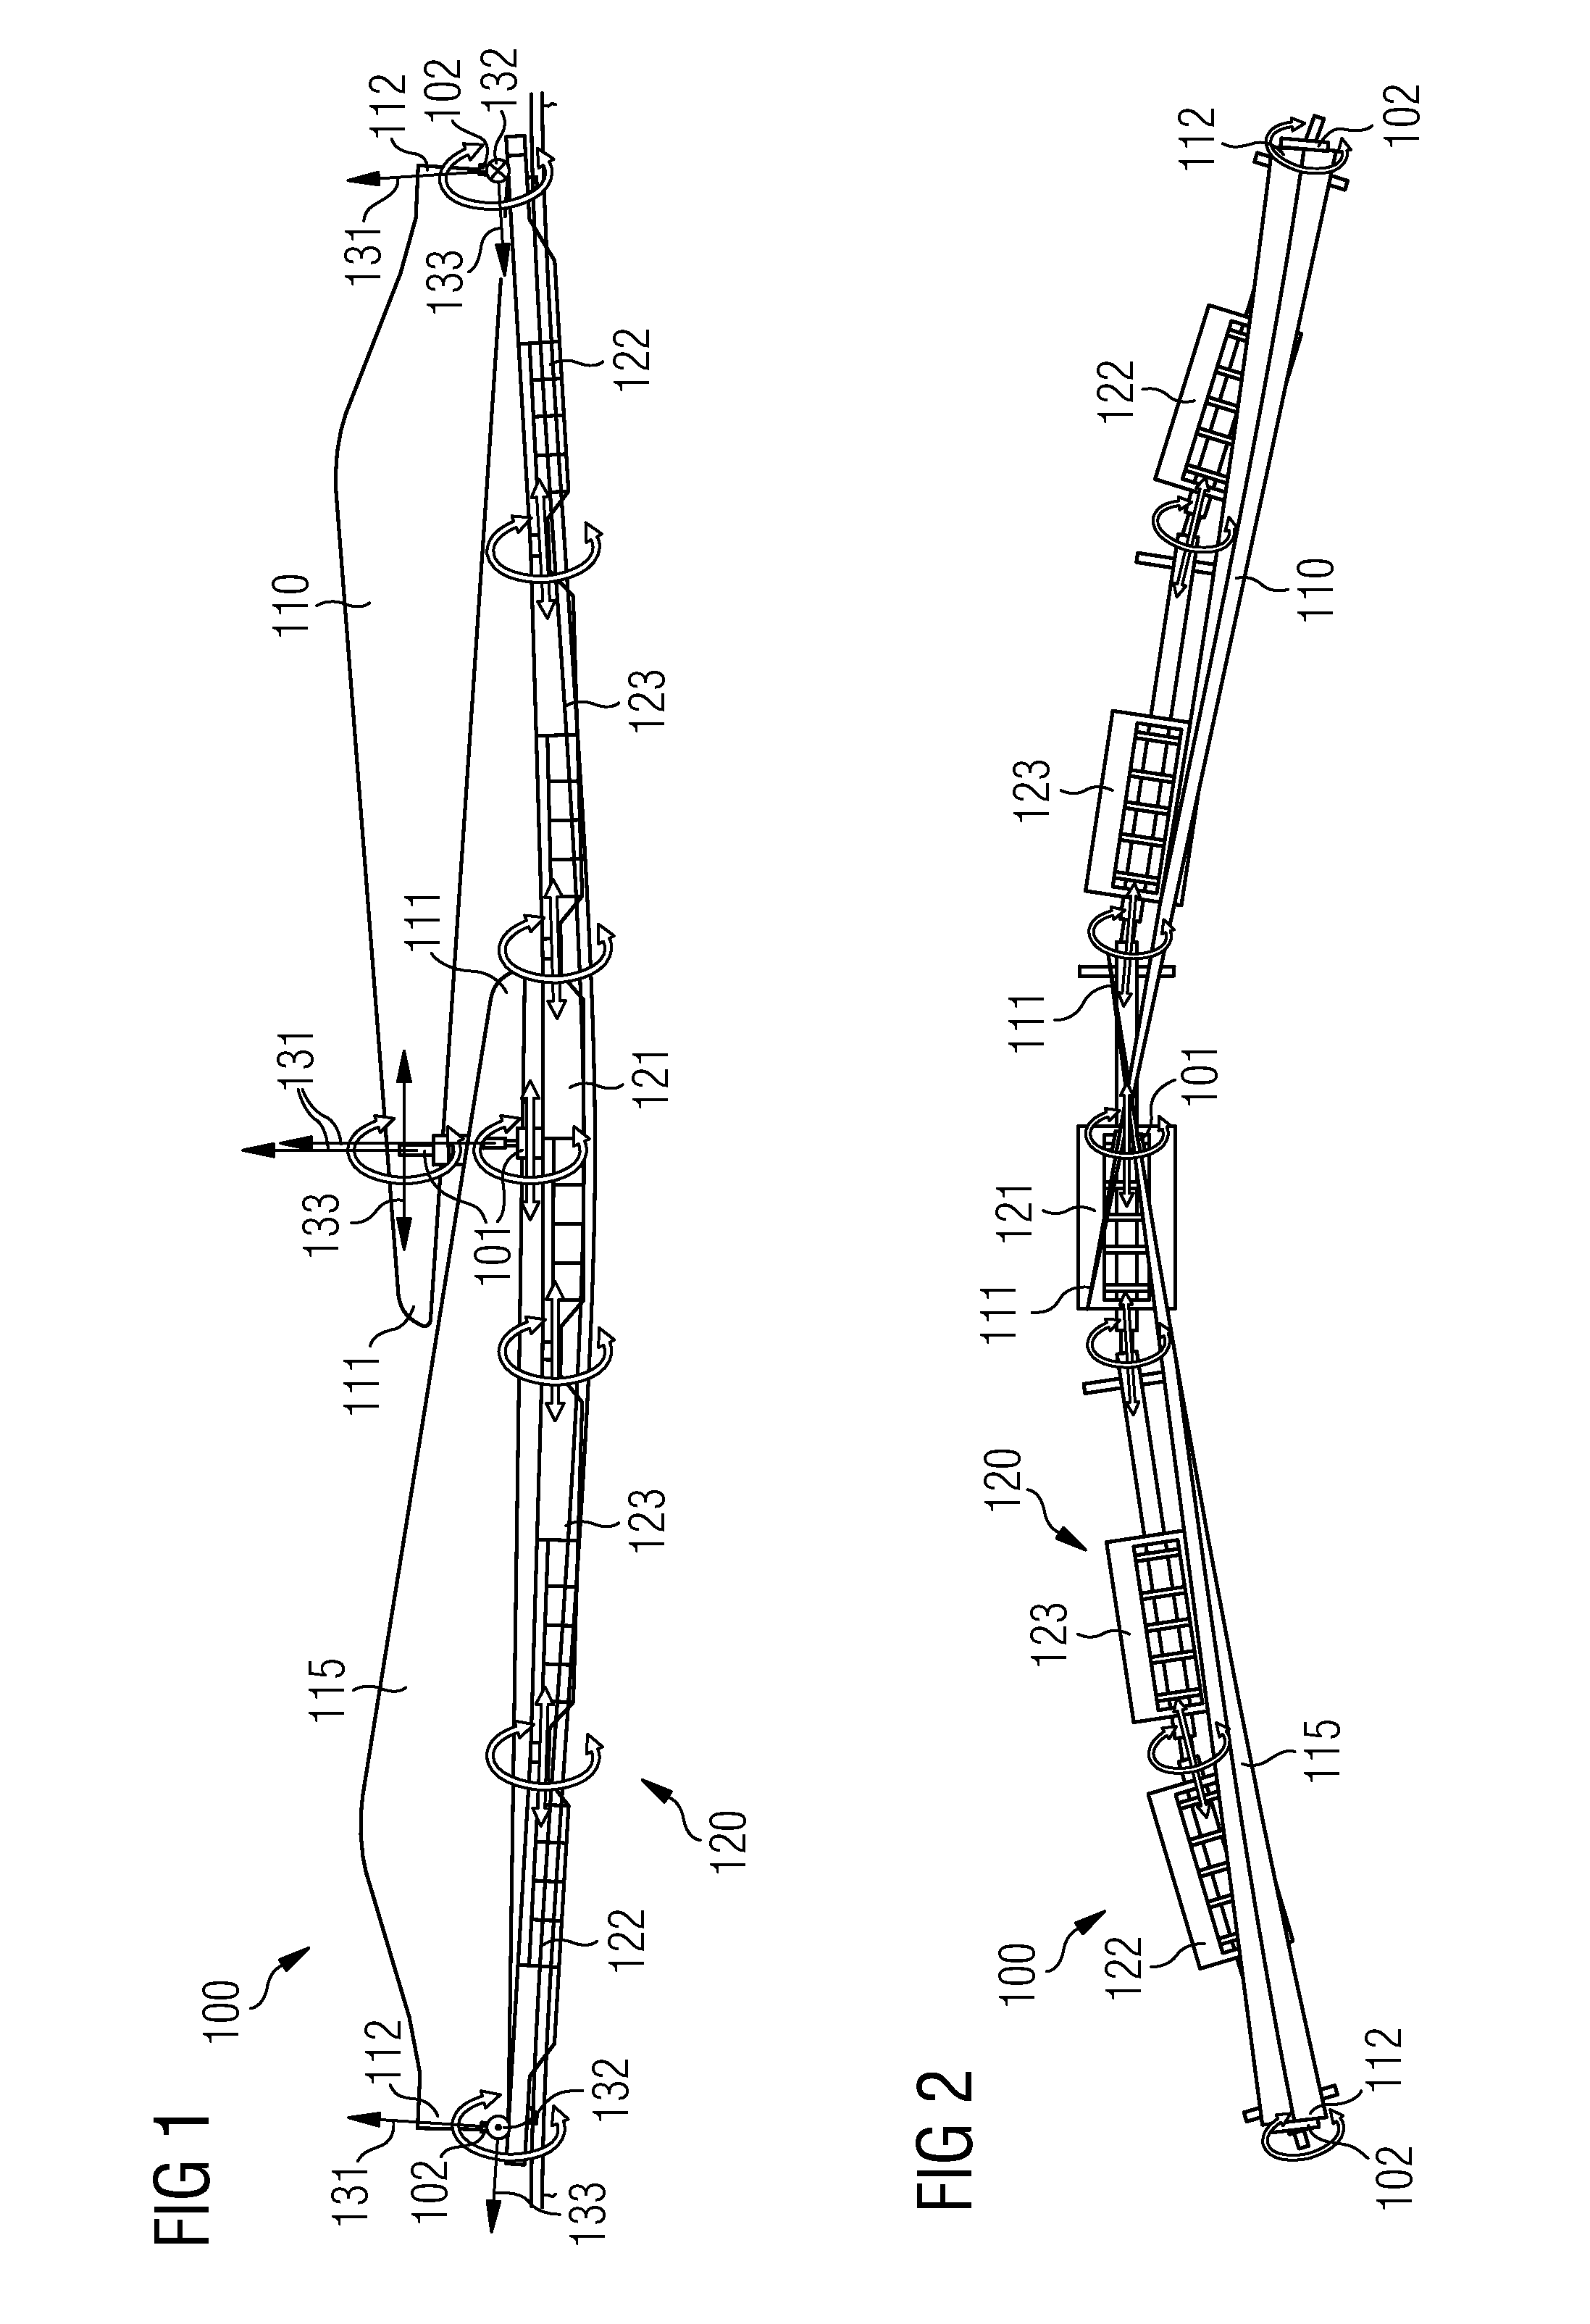 System for transportation of blades on railcars